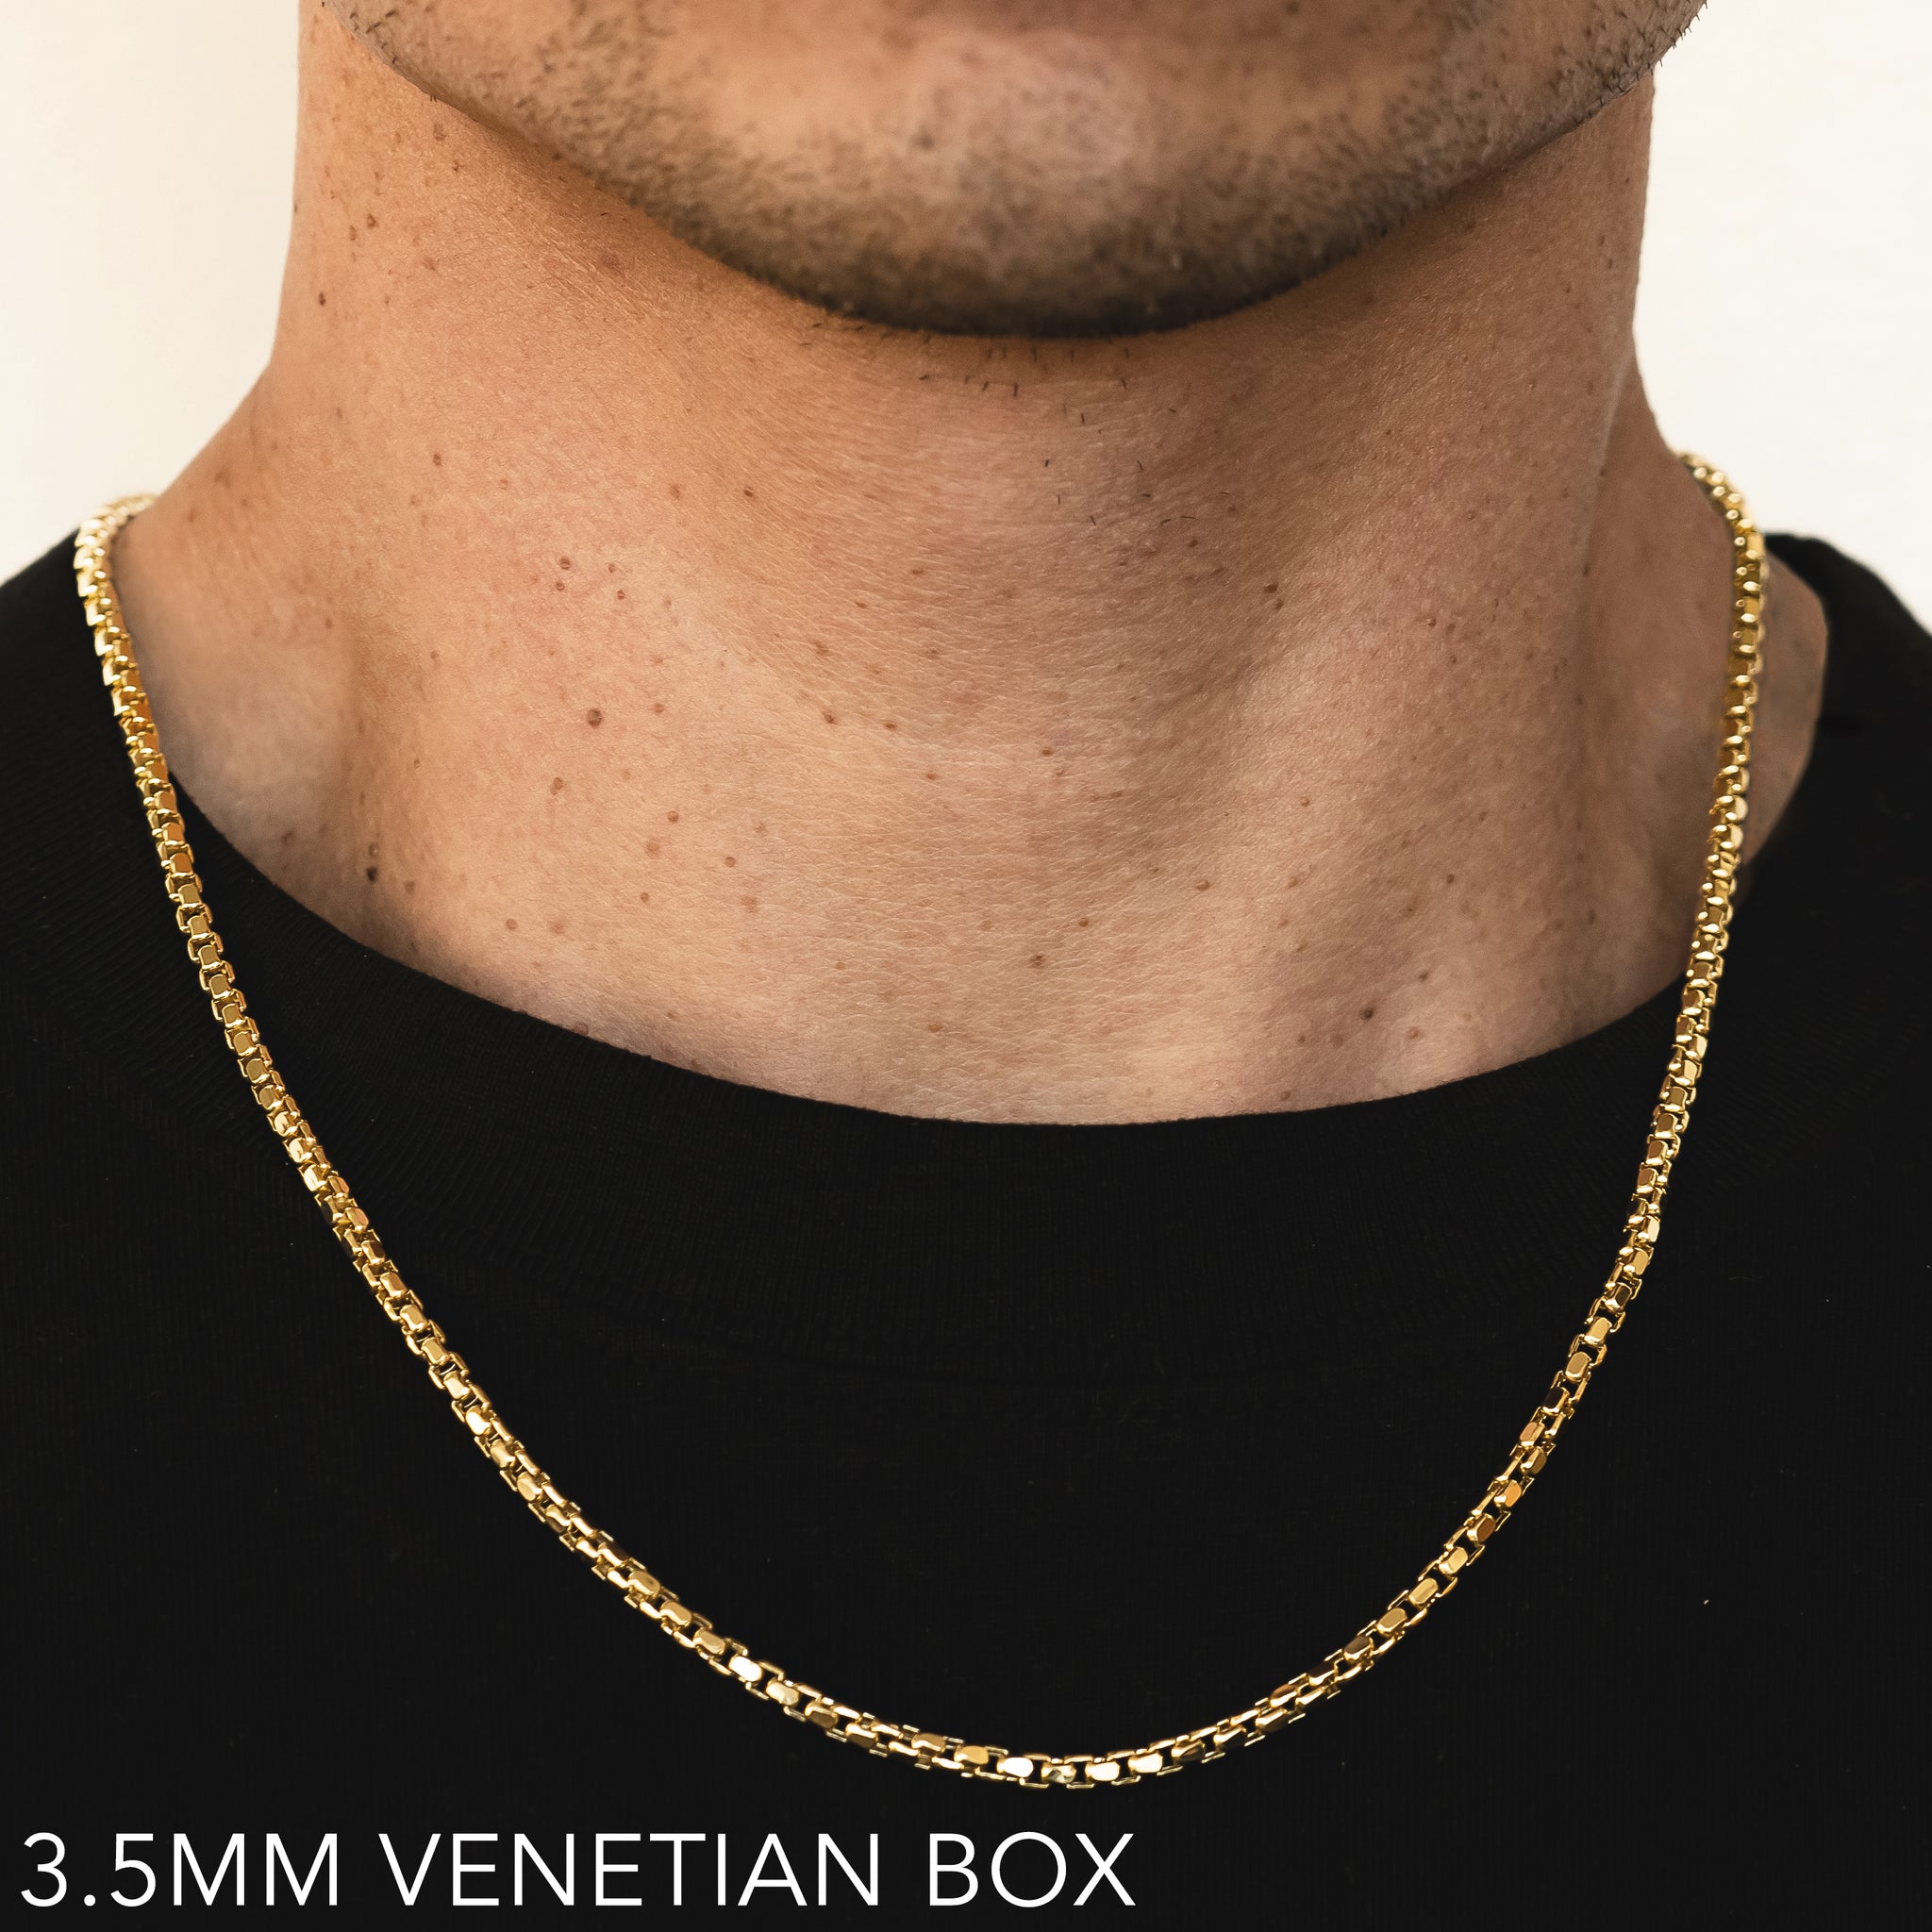 18K 3.5MM YELLOW GOLD SOLID VENETIAN BOX 16" CHAIN NECKLACE (AVAILABLE IN LENGTHS 7" - 30")